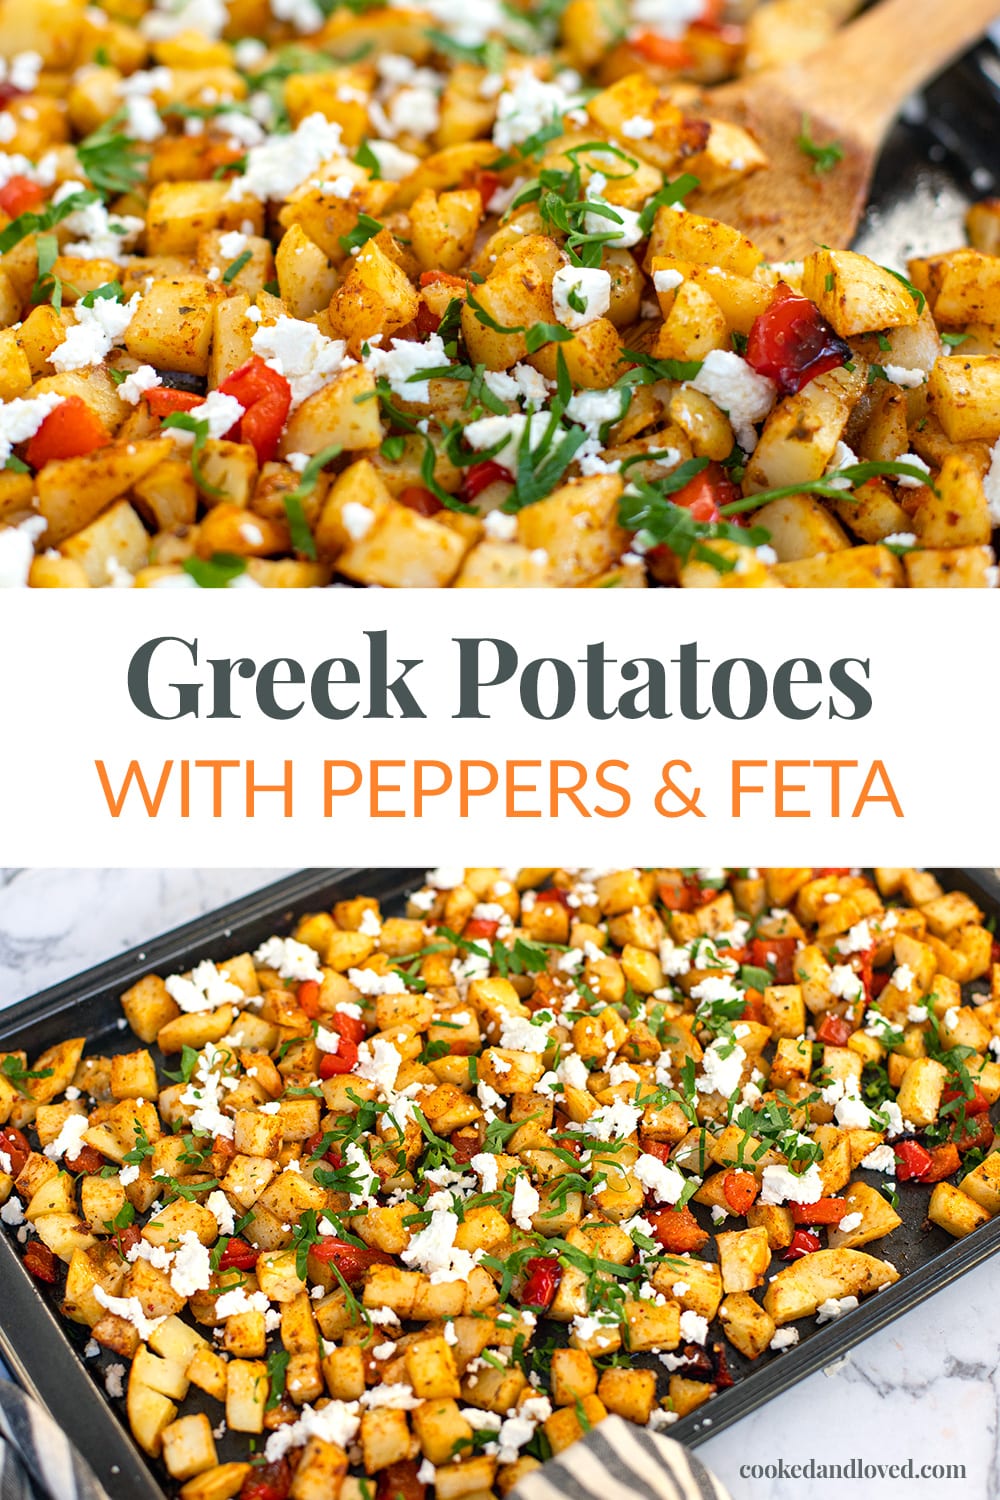 Greek Roasted Potatoes With Red Bell Peppers & Feta